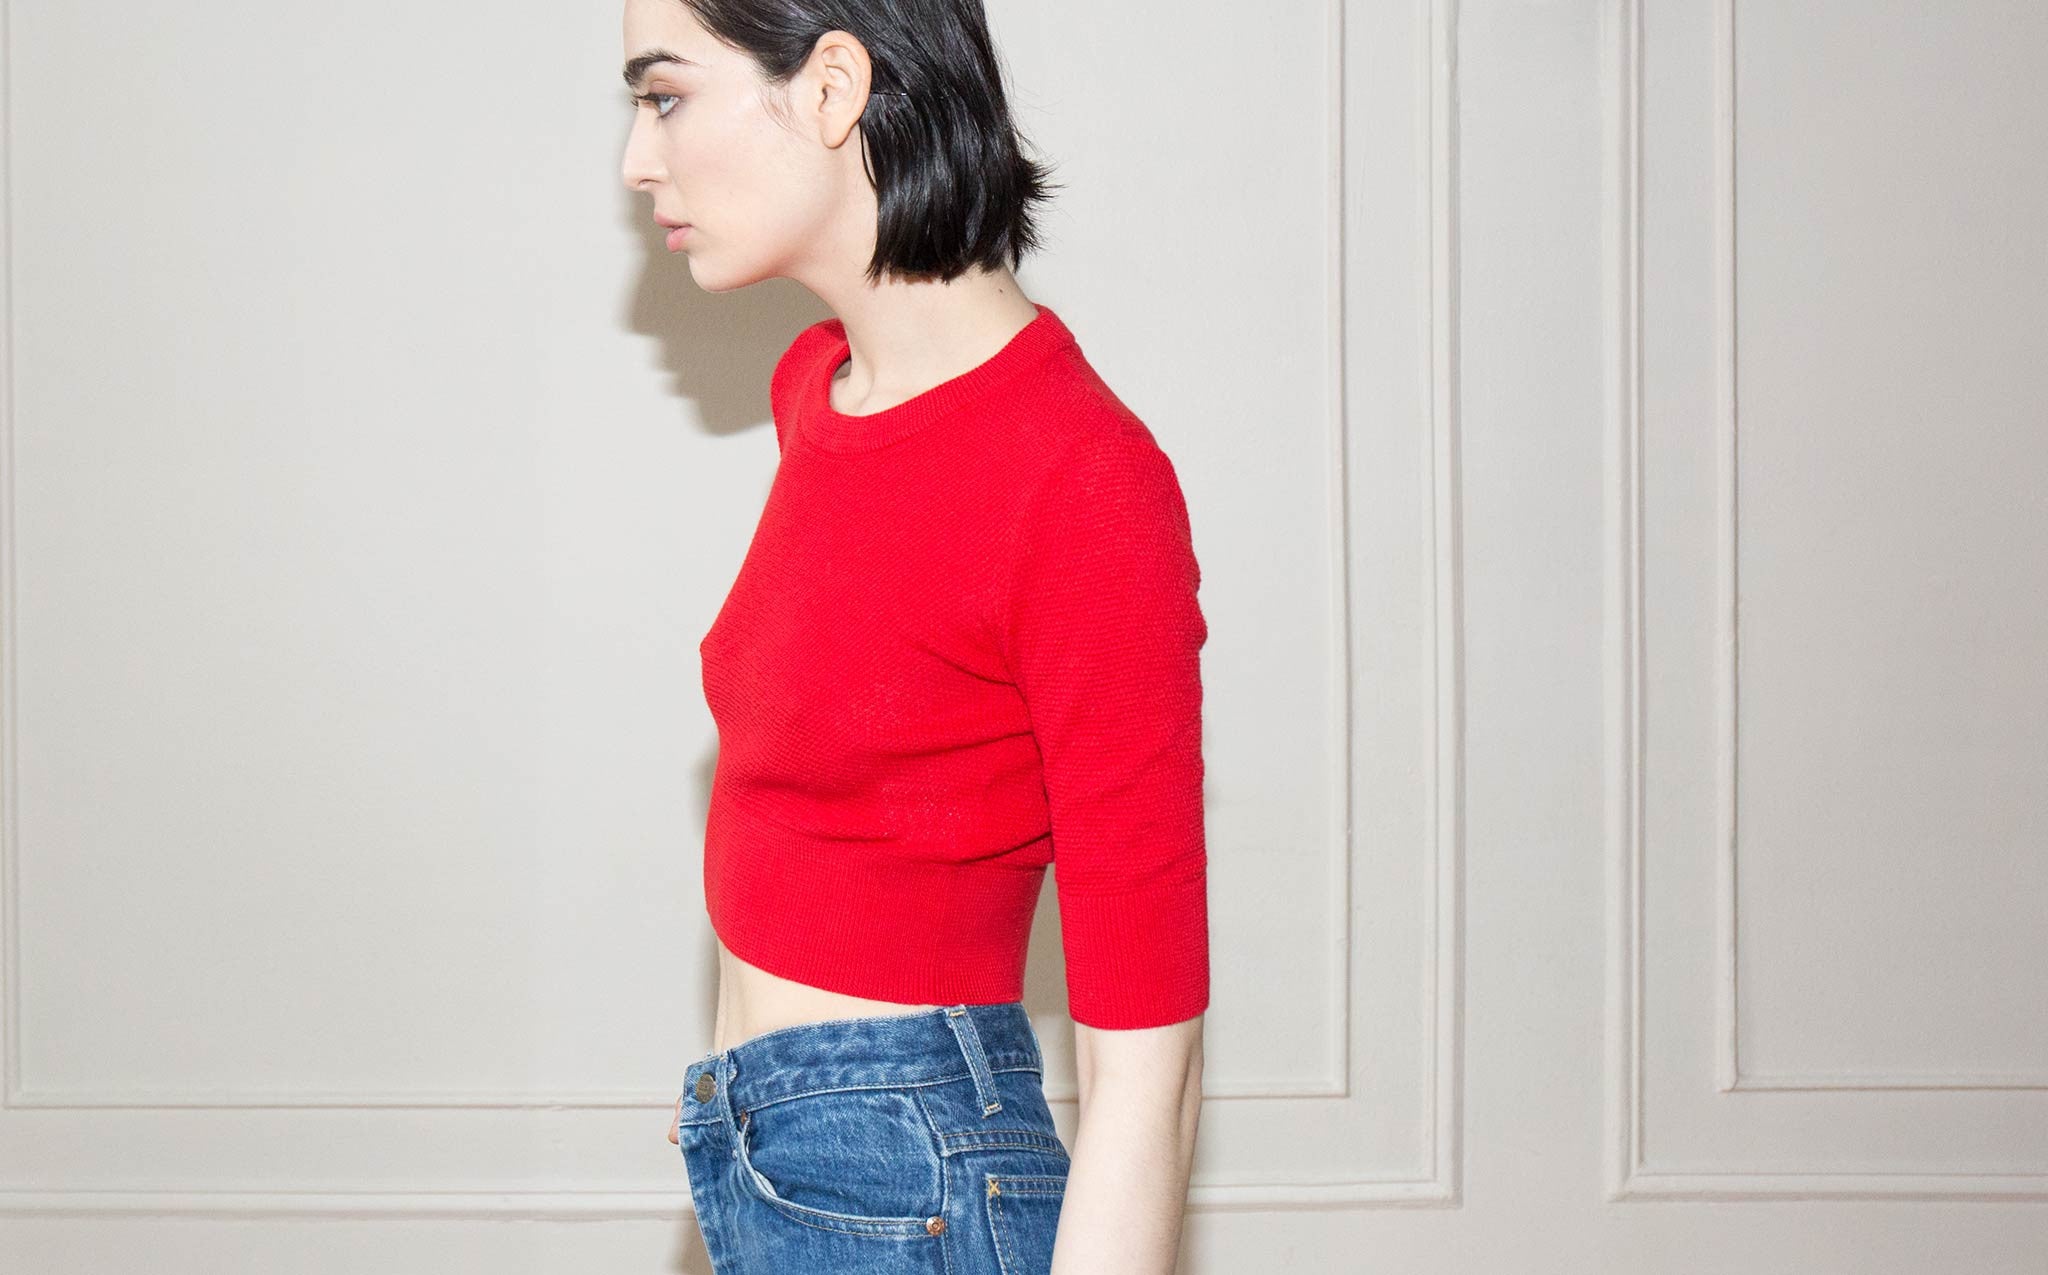 Hesperios Camille Poppy Red Crop Top Kindred Black